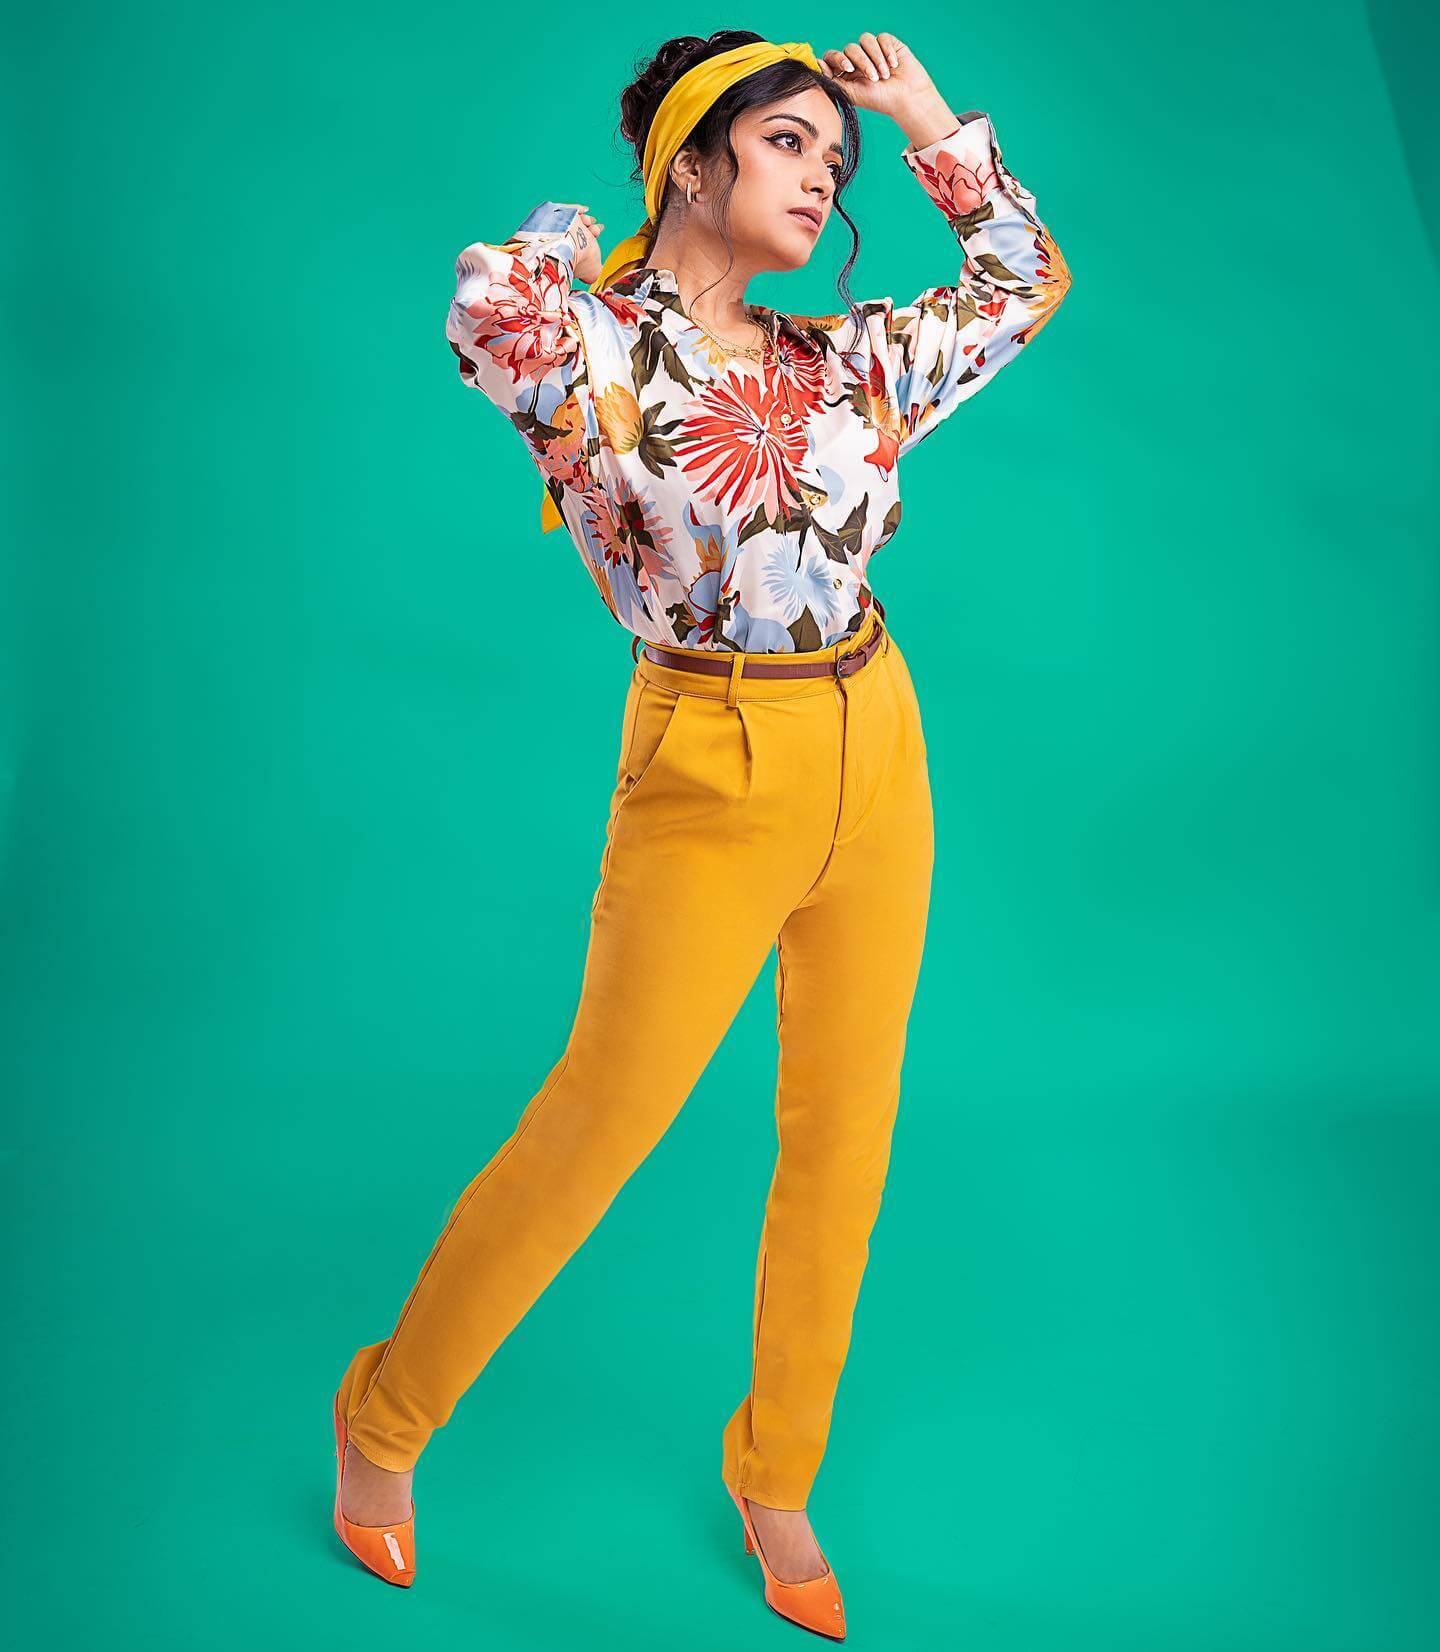 Janani Iyer Gives Us Retro Vibes In Floral Print Shirt Paired With Yellow Slim Fit Pants With Yellow Head Band